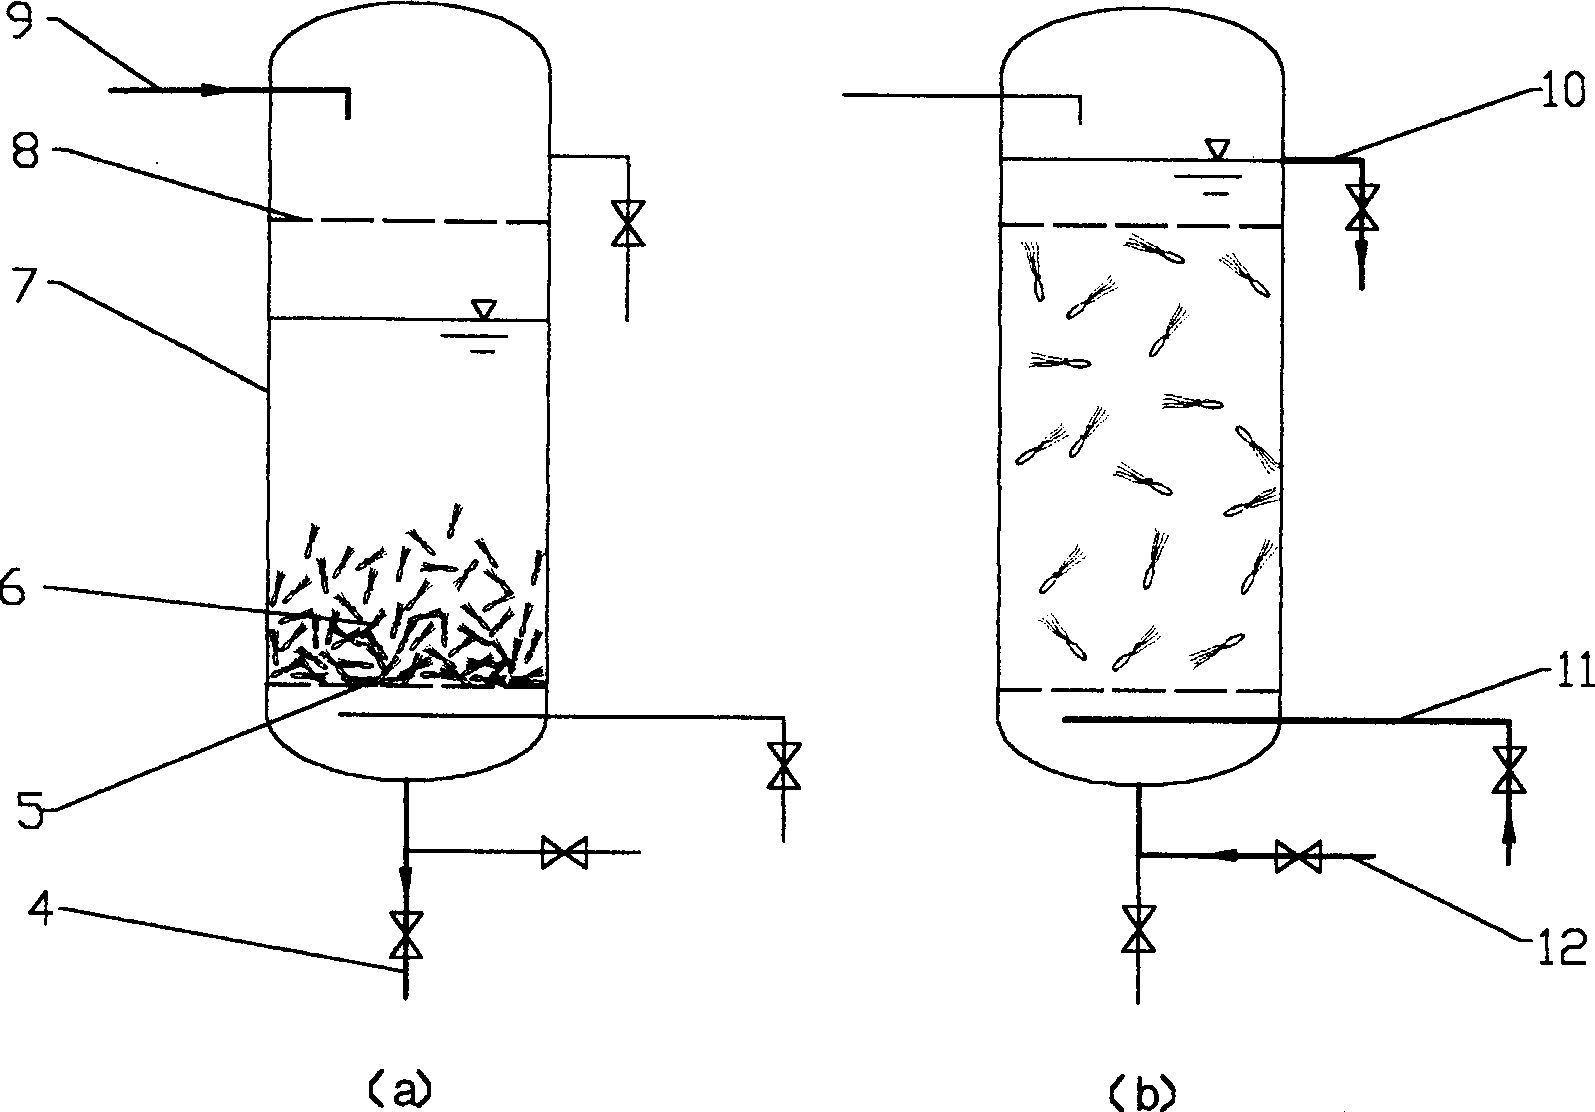 Fibrous filtering material for water treatment